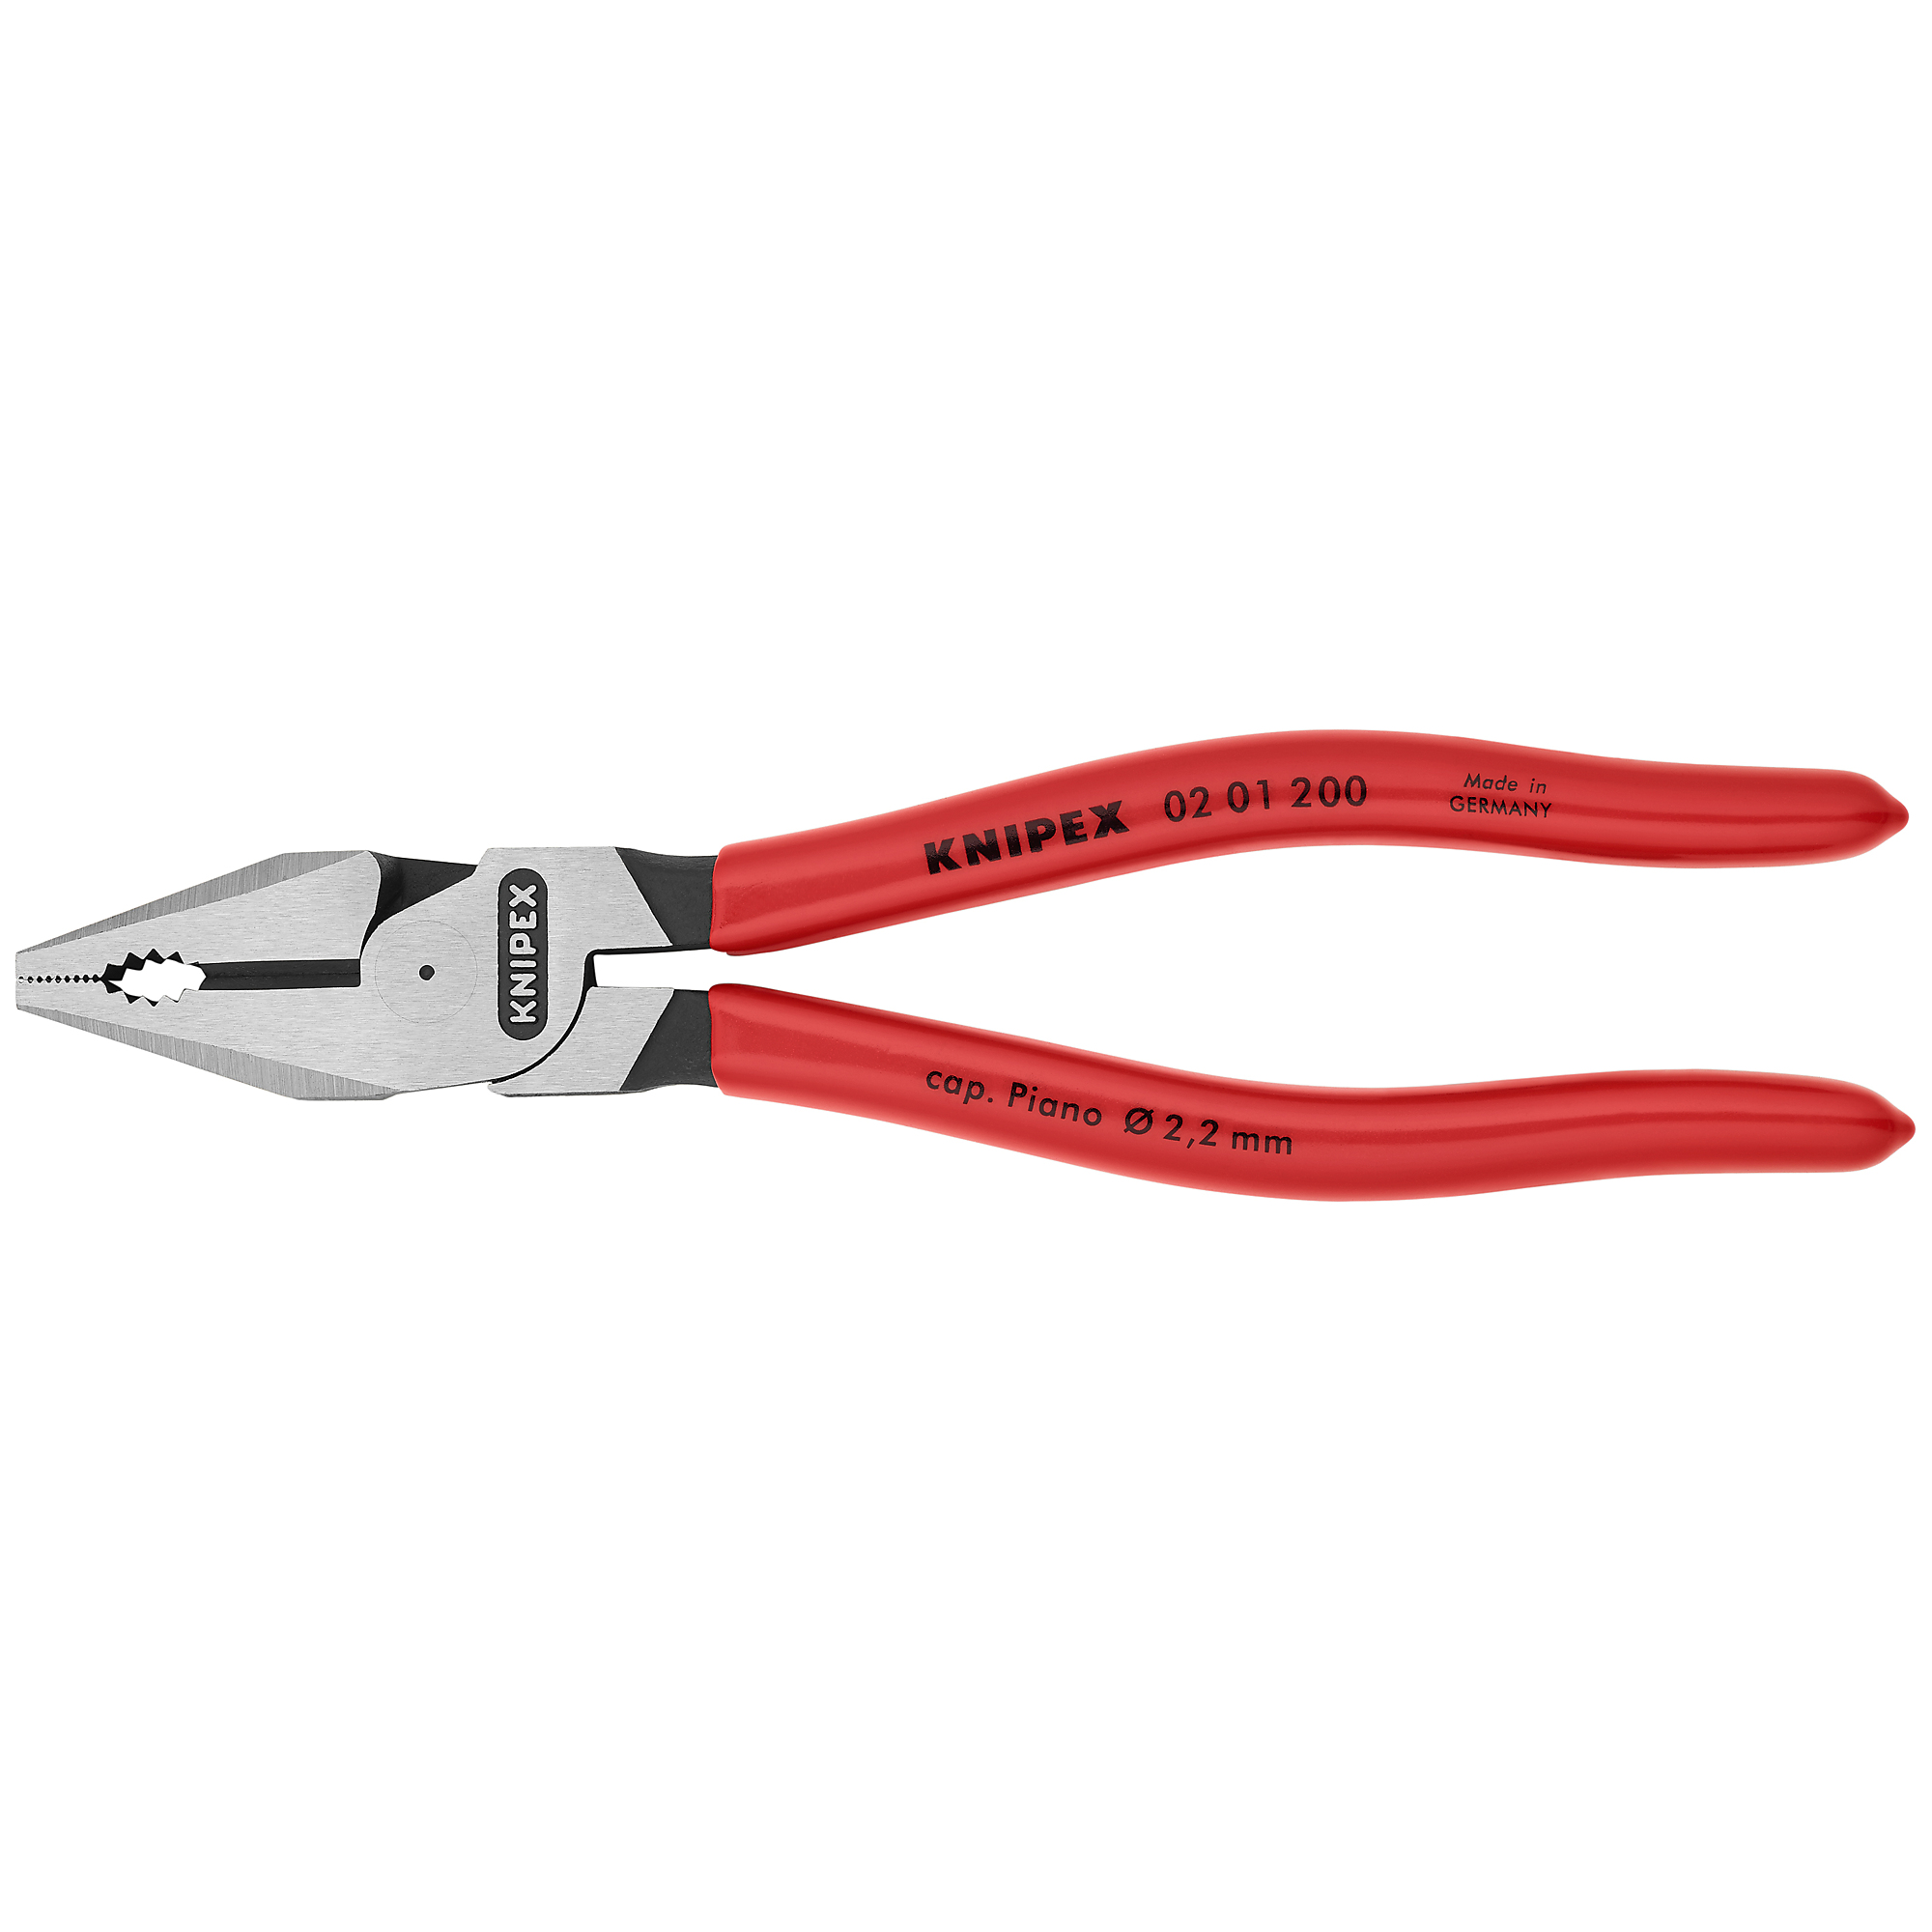 KNIPEX, HL Combination Pliers, Plastic coating, Bulk, 8Inch, Pieces (qty.) 1 Material Steel, Jaw Capacity 0.109 in, Model 02 01 200